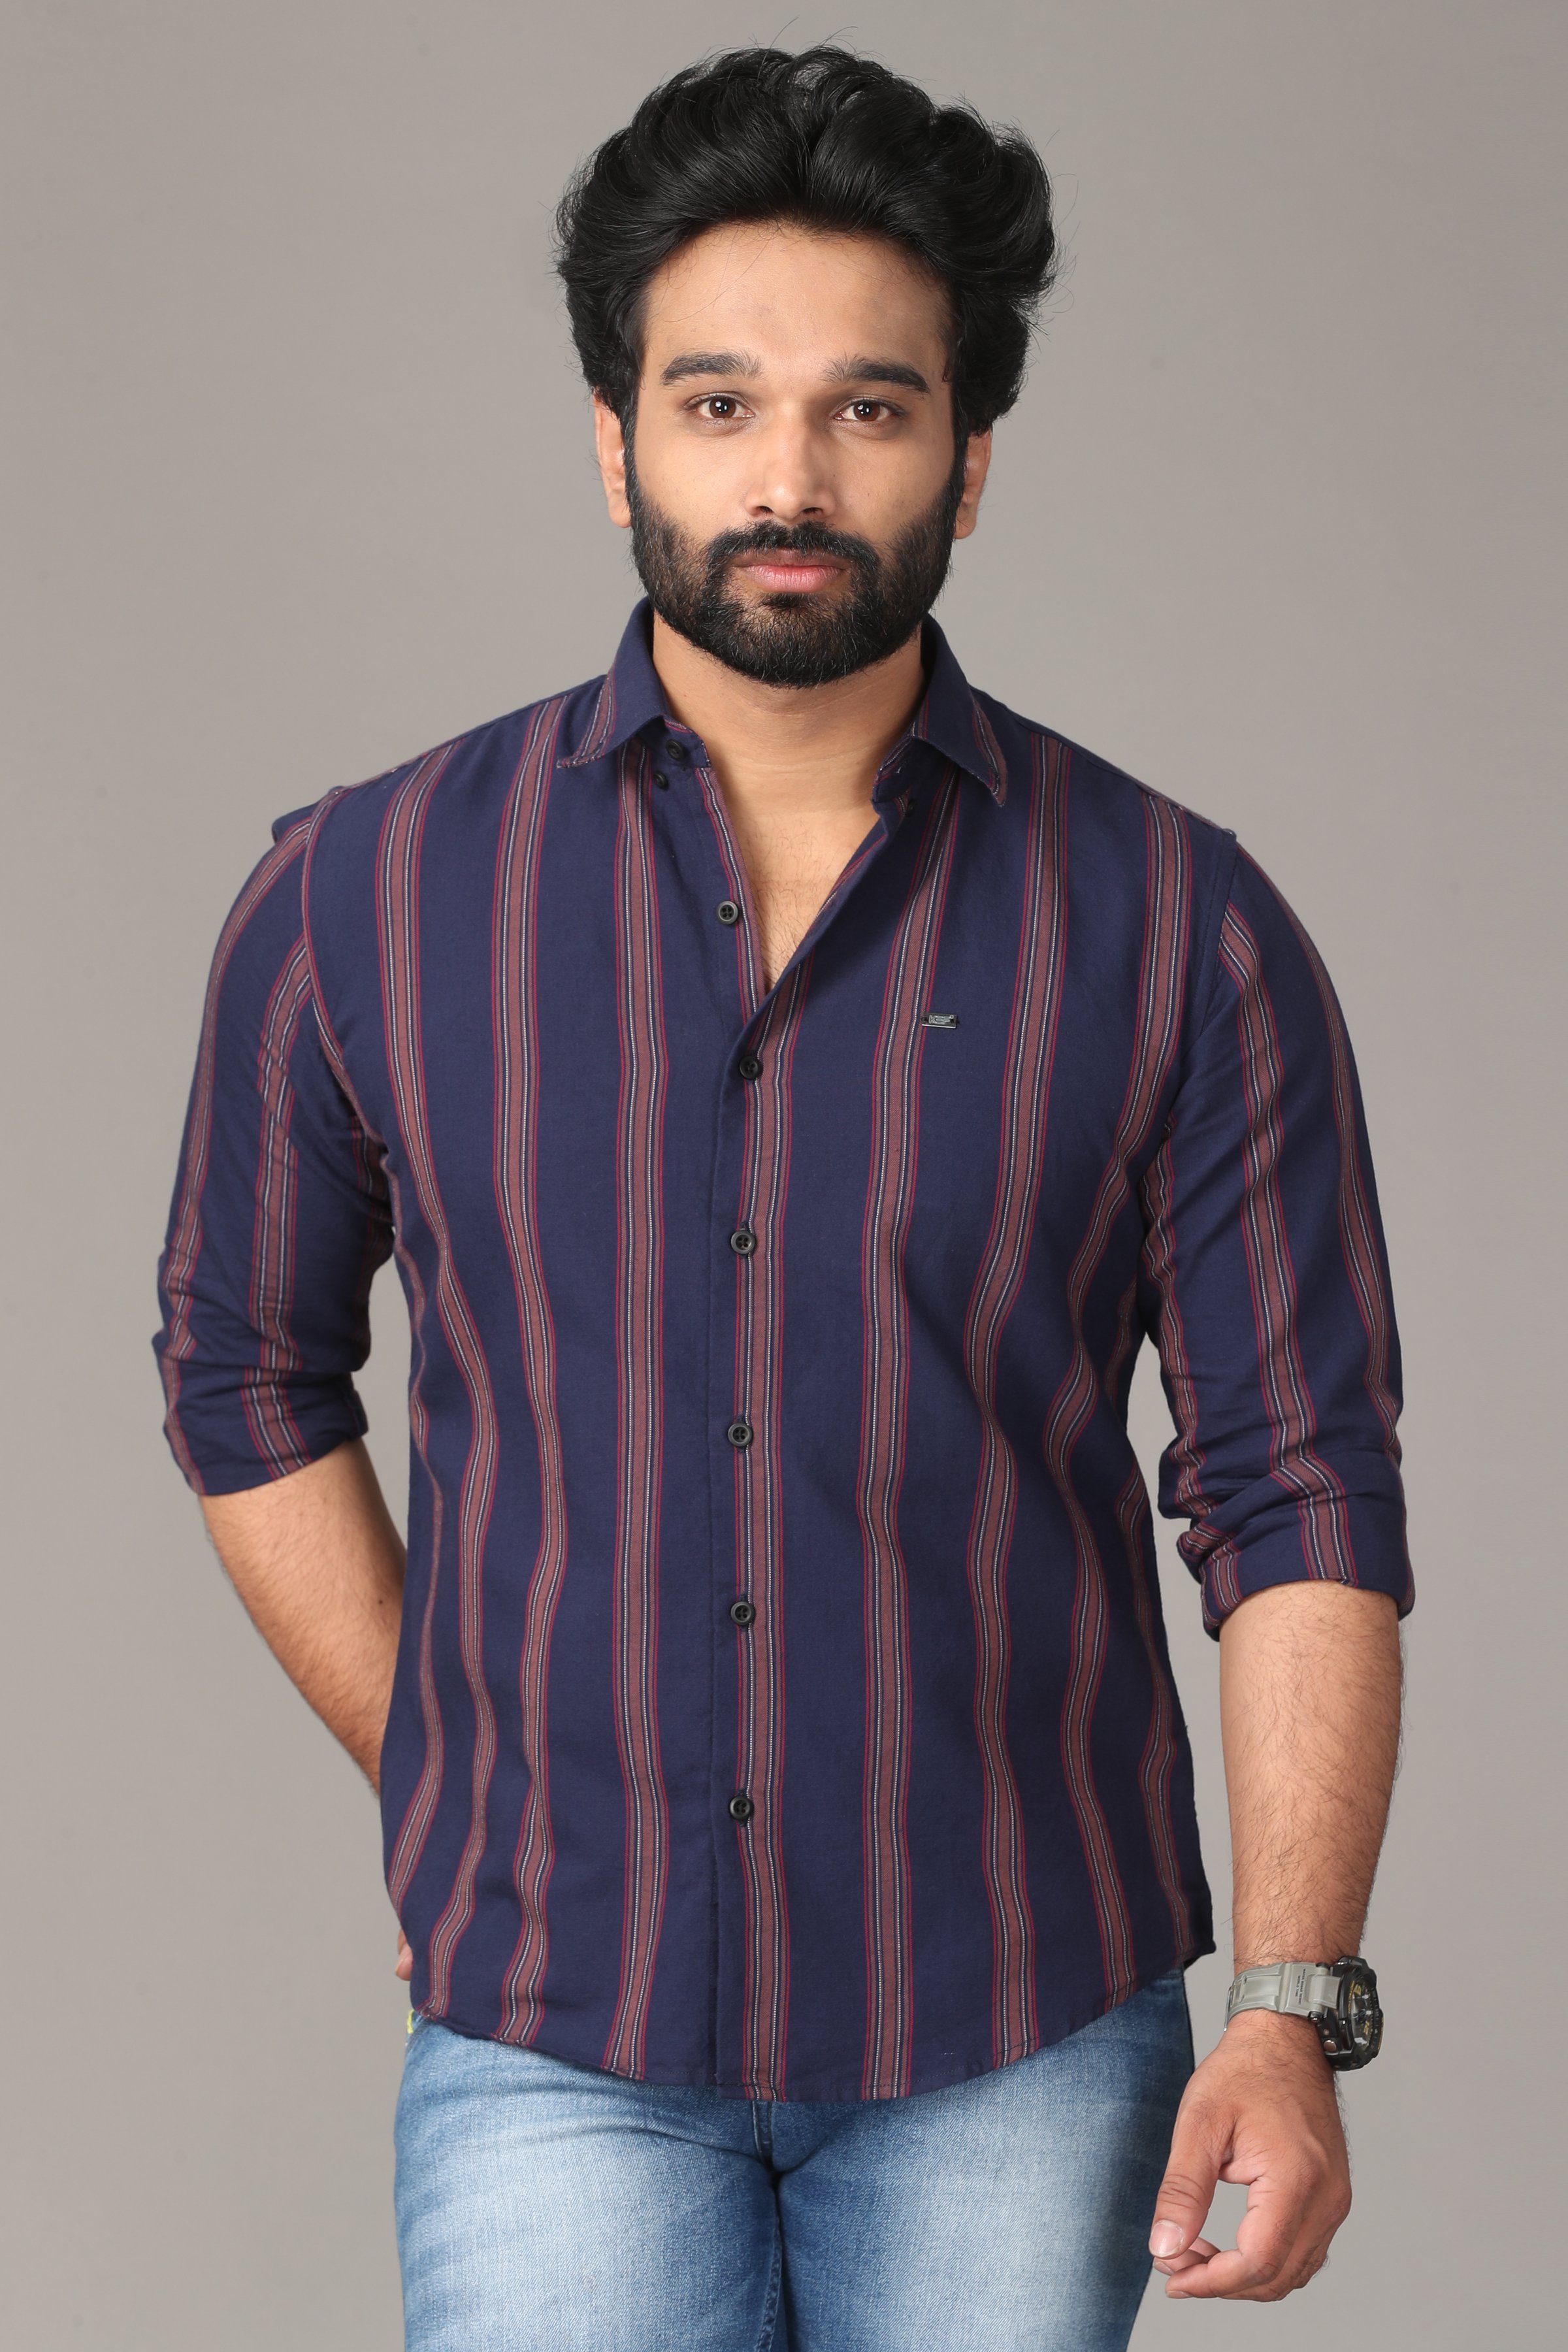 Dark Blue Full Sleeve Shirt with Brown Stripes Shirts KEF S 